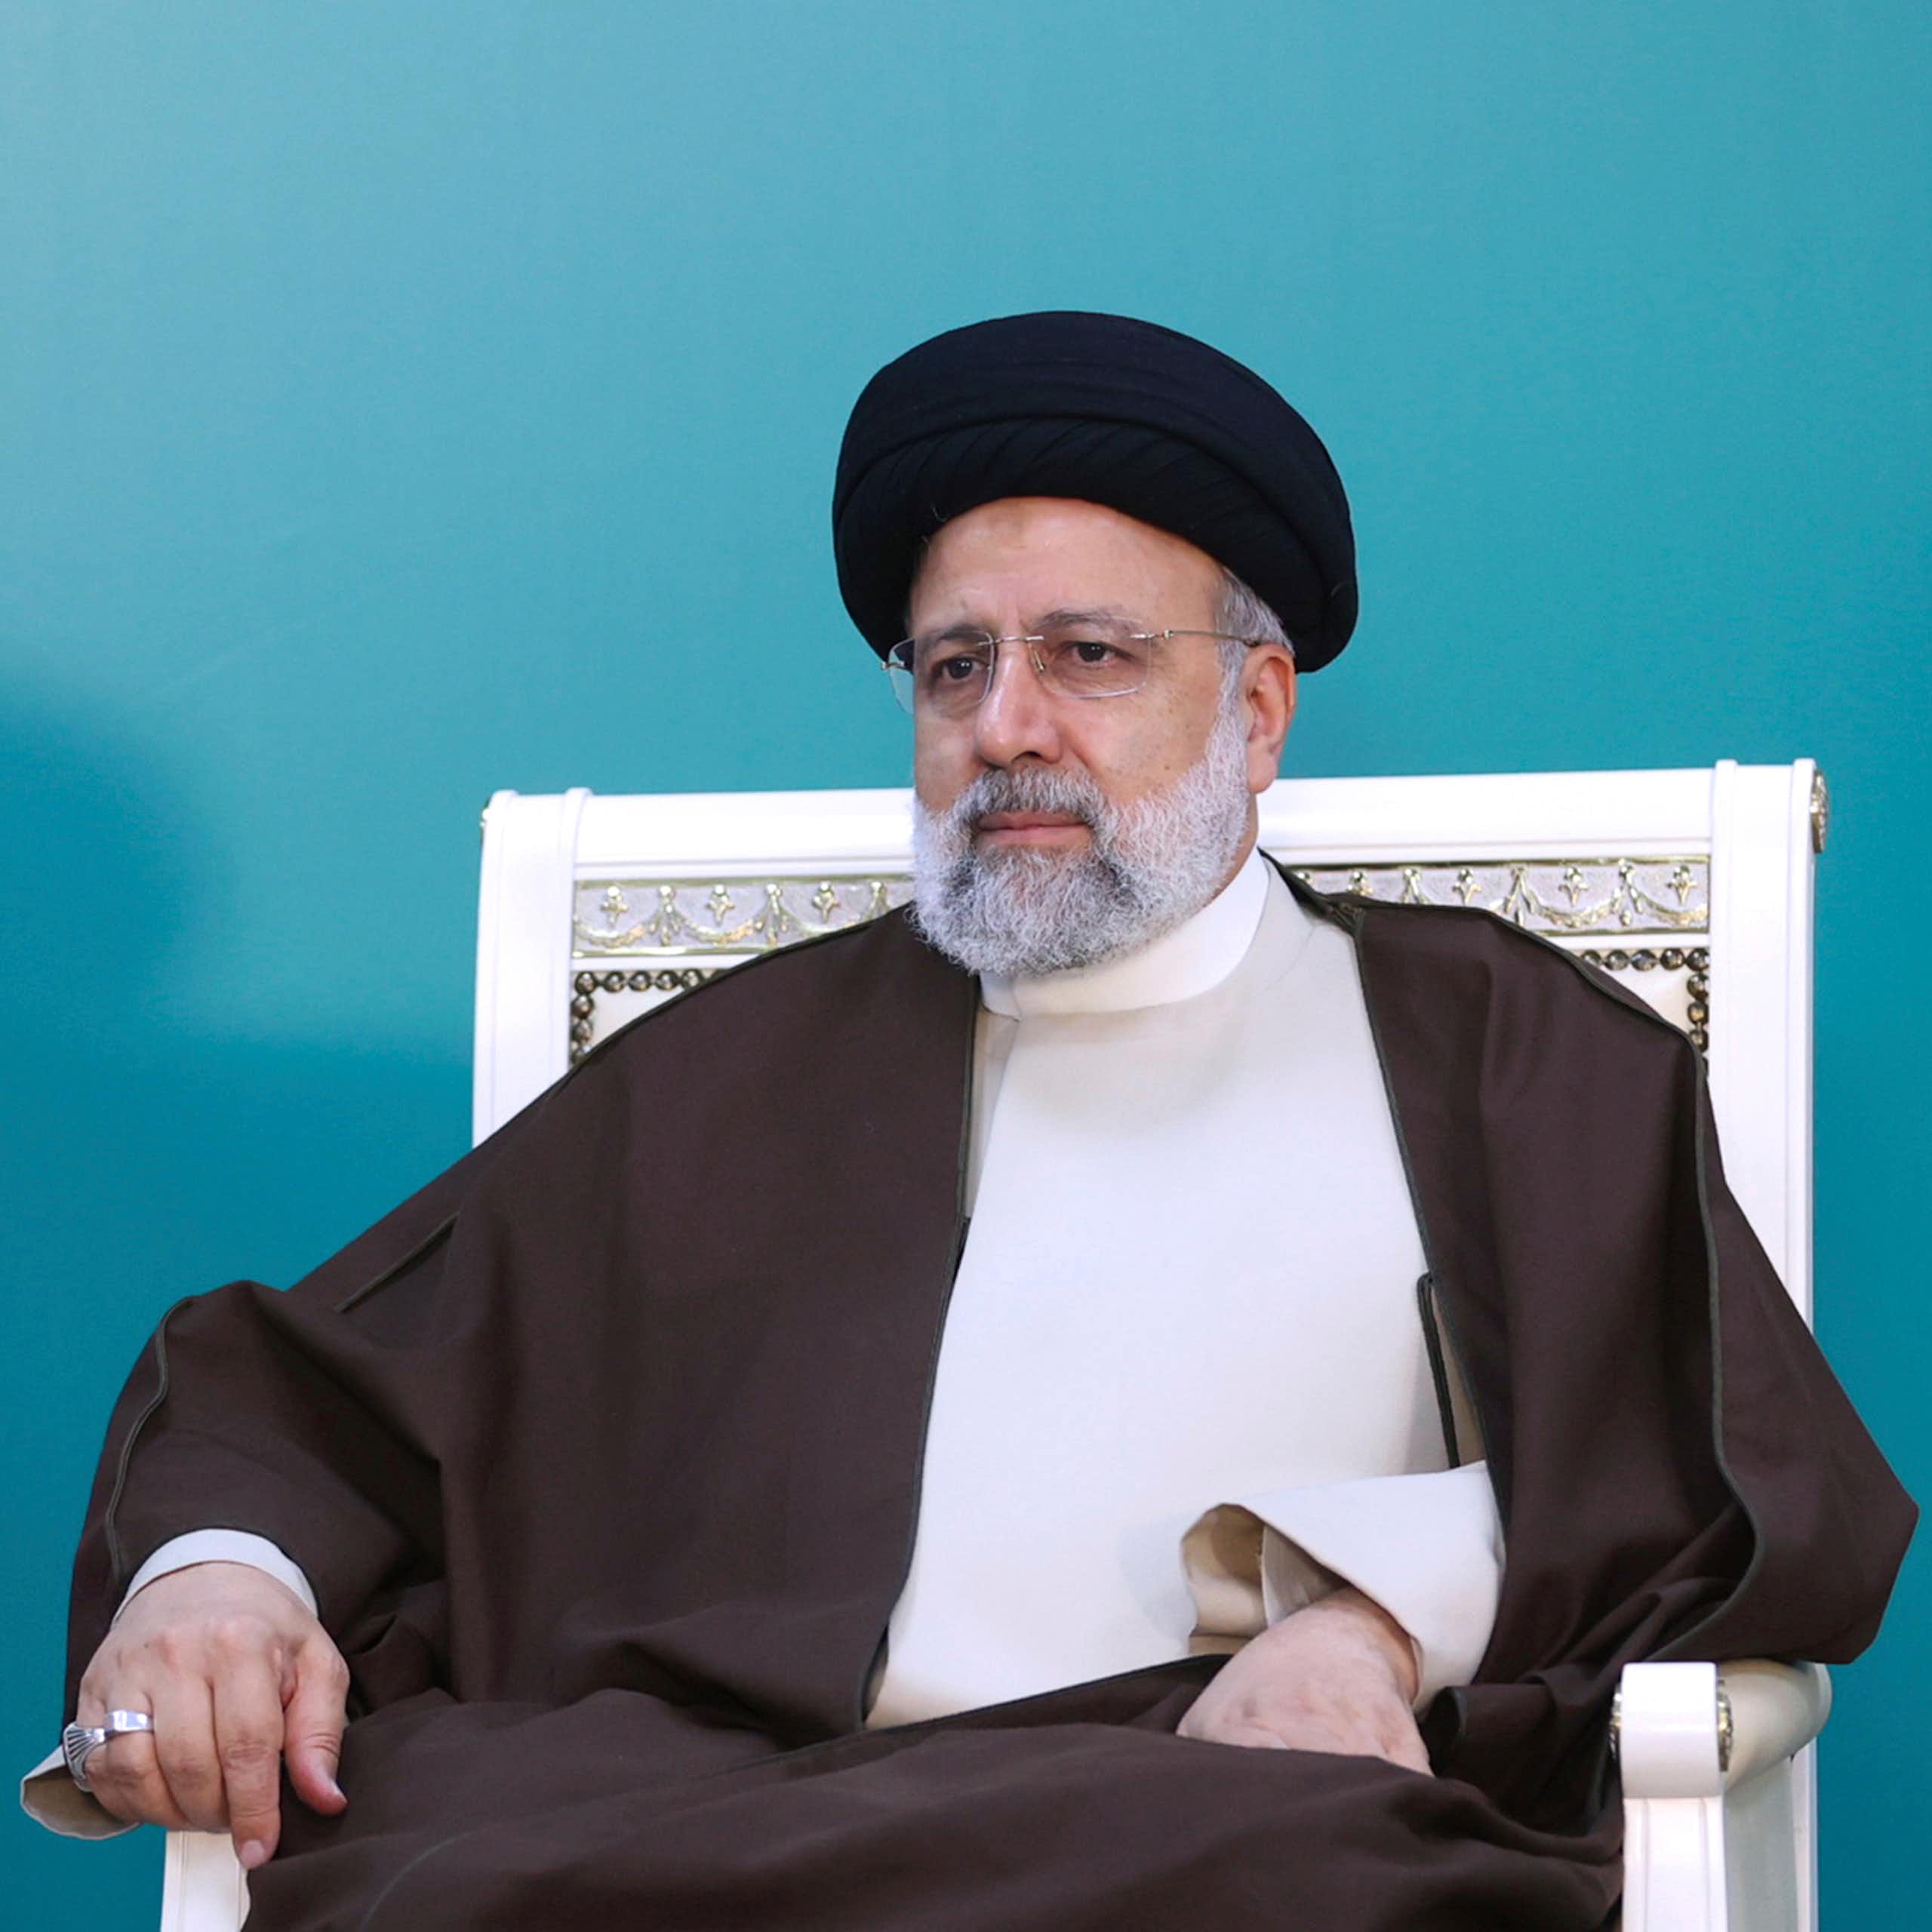 A man in traditional Iranian dress sits on a chair.